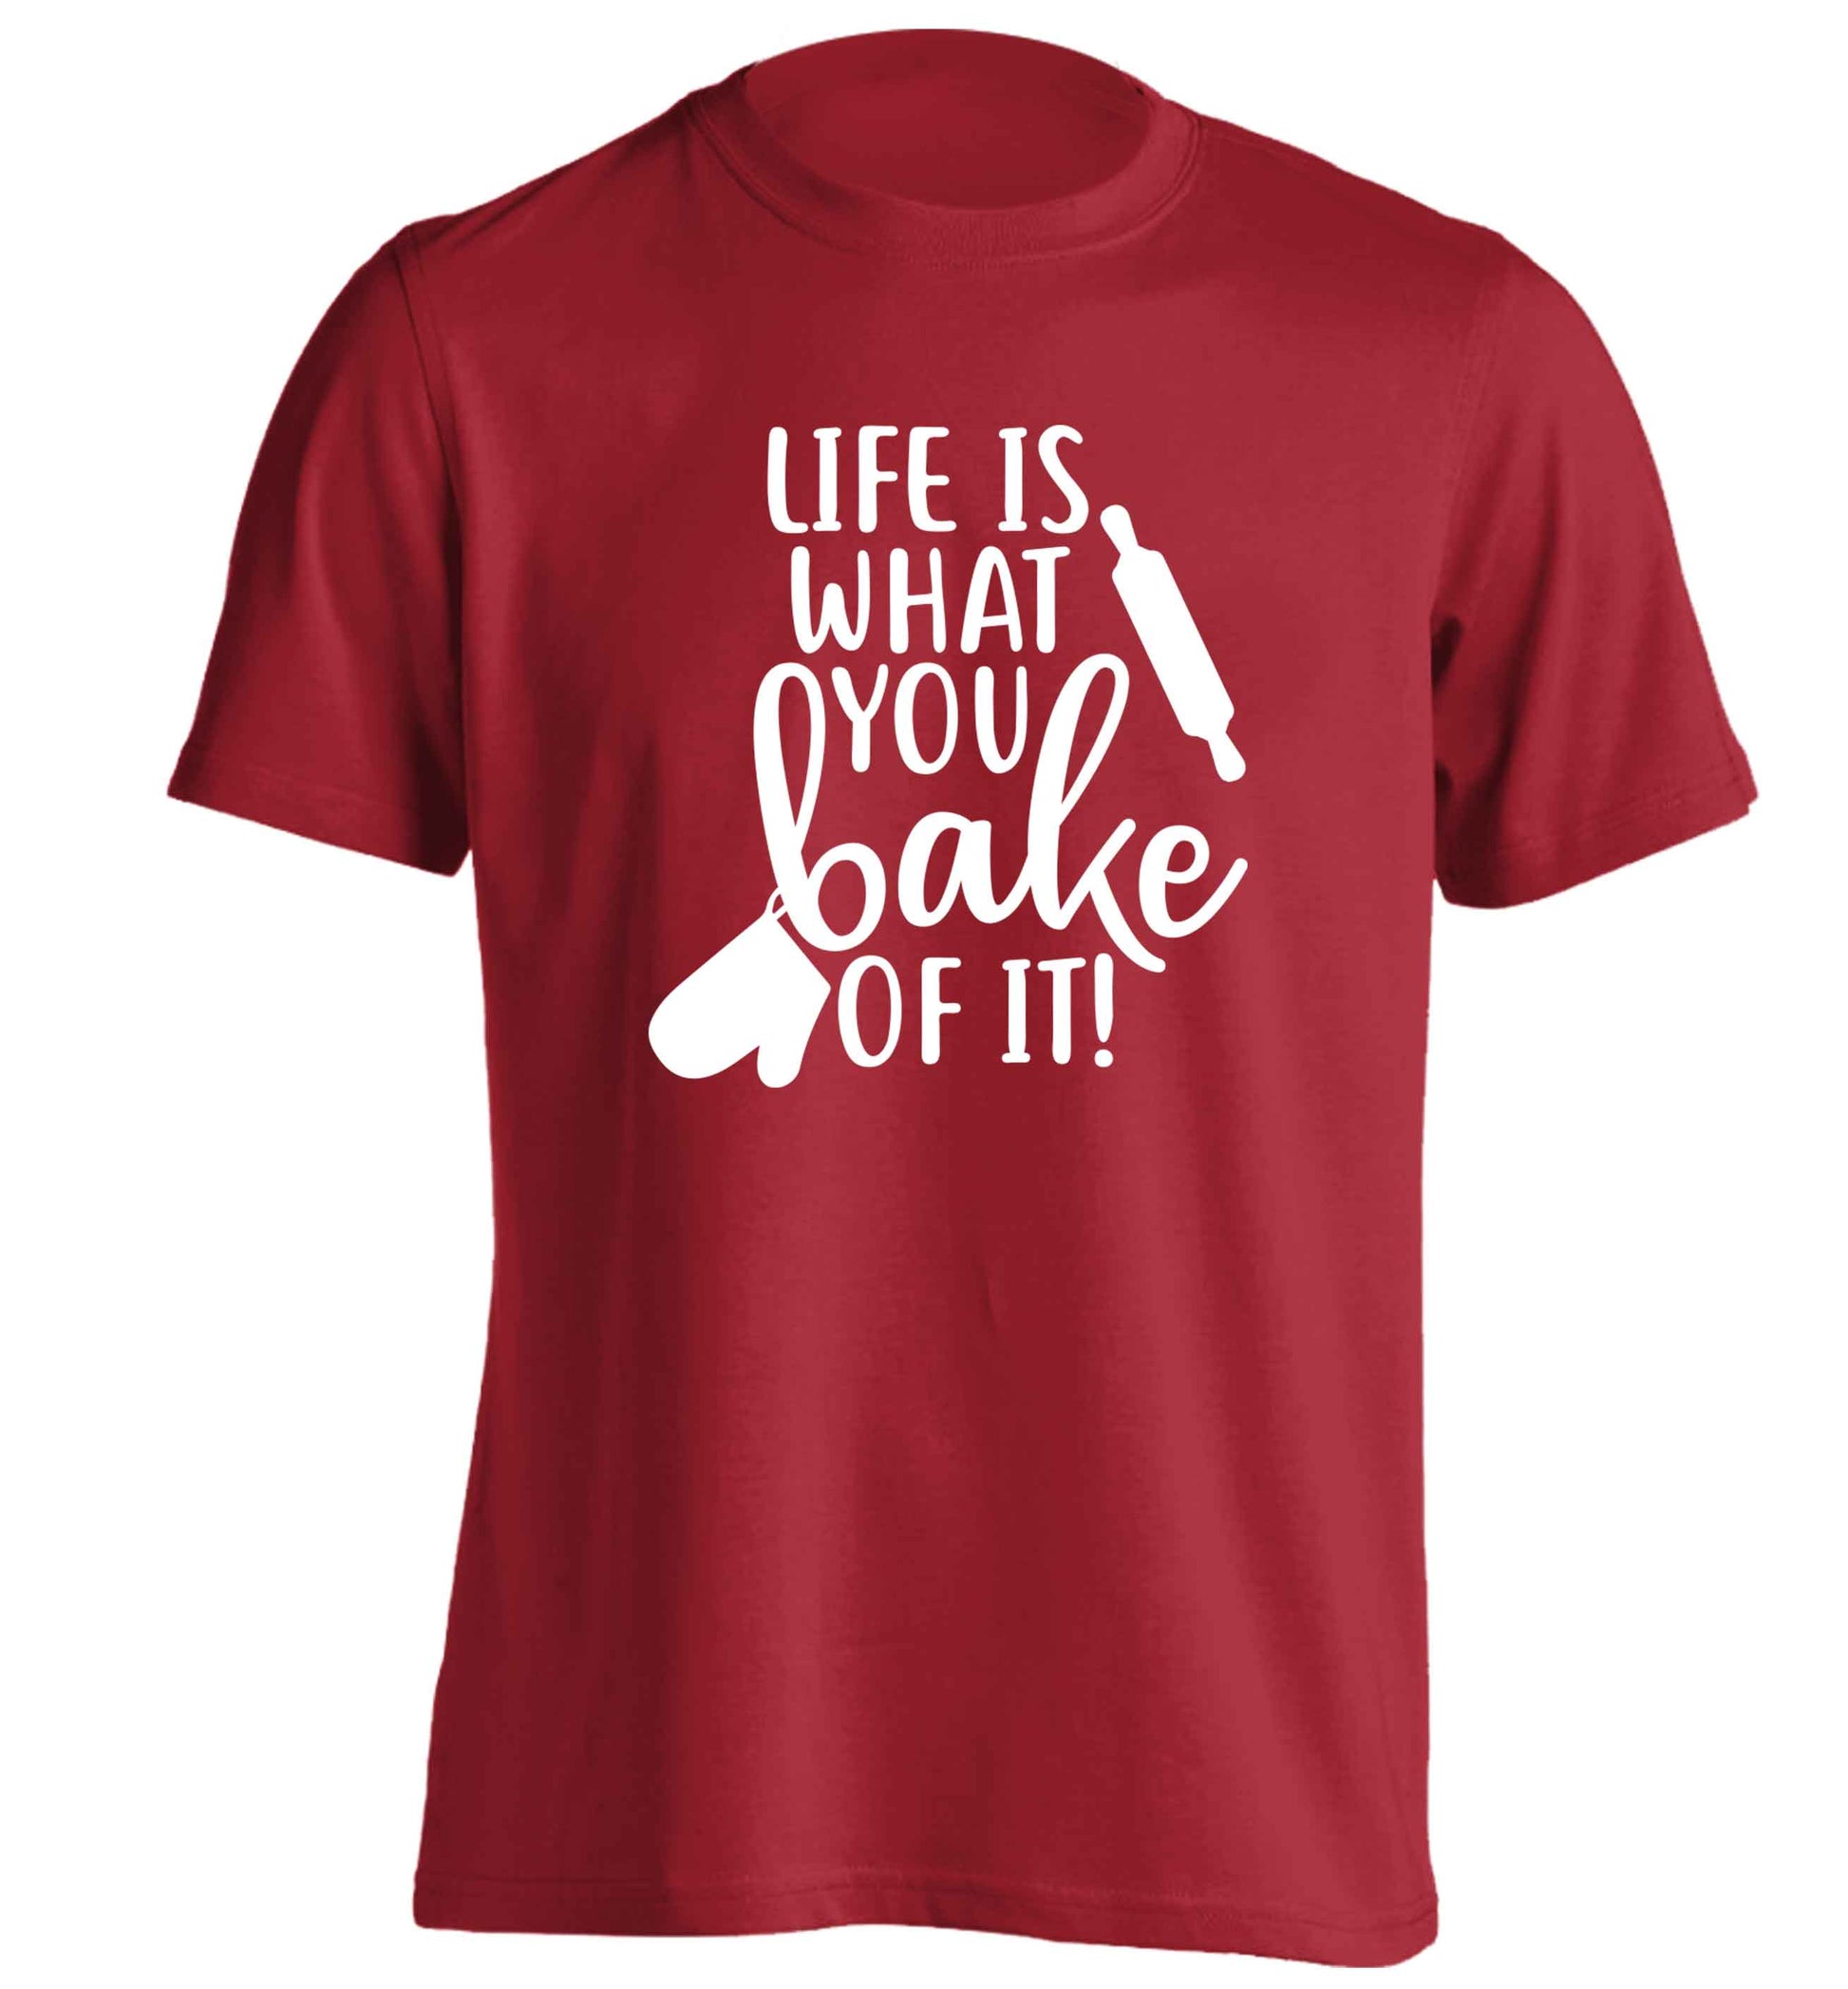 Life is what you bake of it adults unisex red Tshirt 2XL